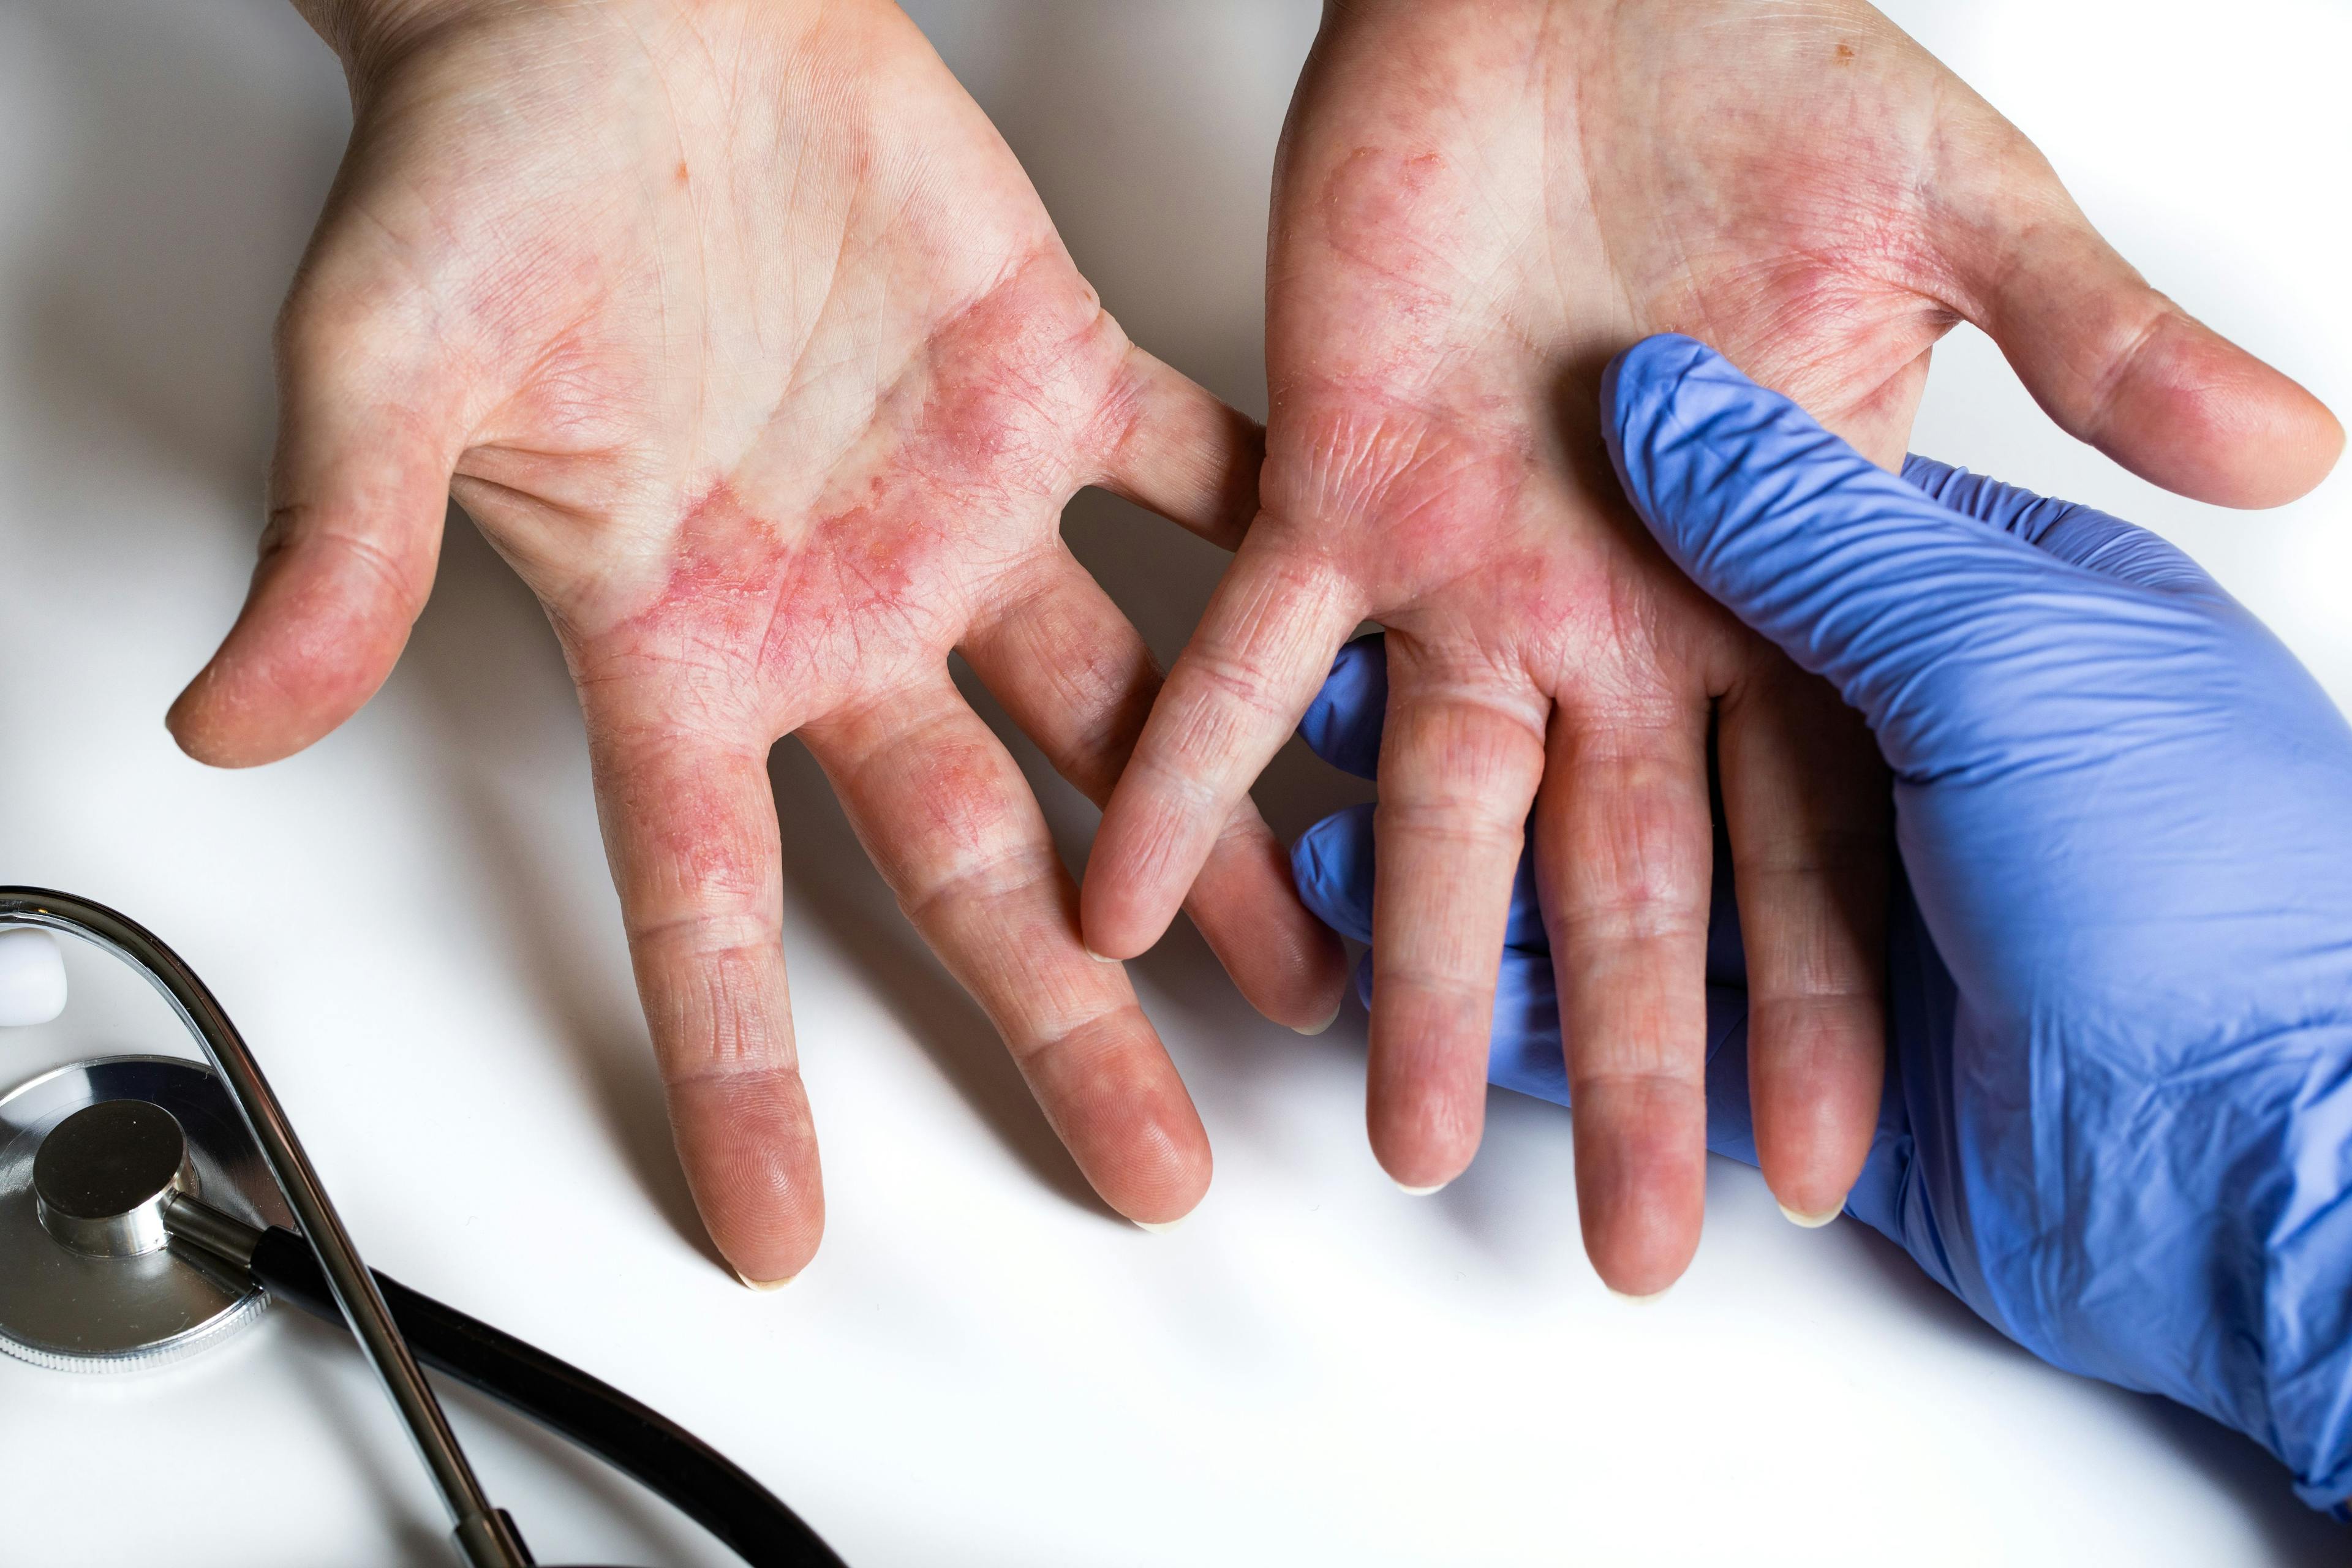 Atopic dermatitis. Red, itchy hands with blisters seen by a dermatologist | Image credit: Rochu_2008 - stock.adobe.com